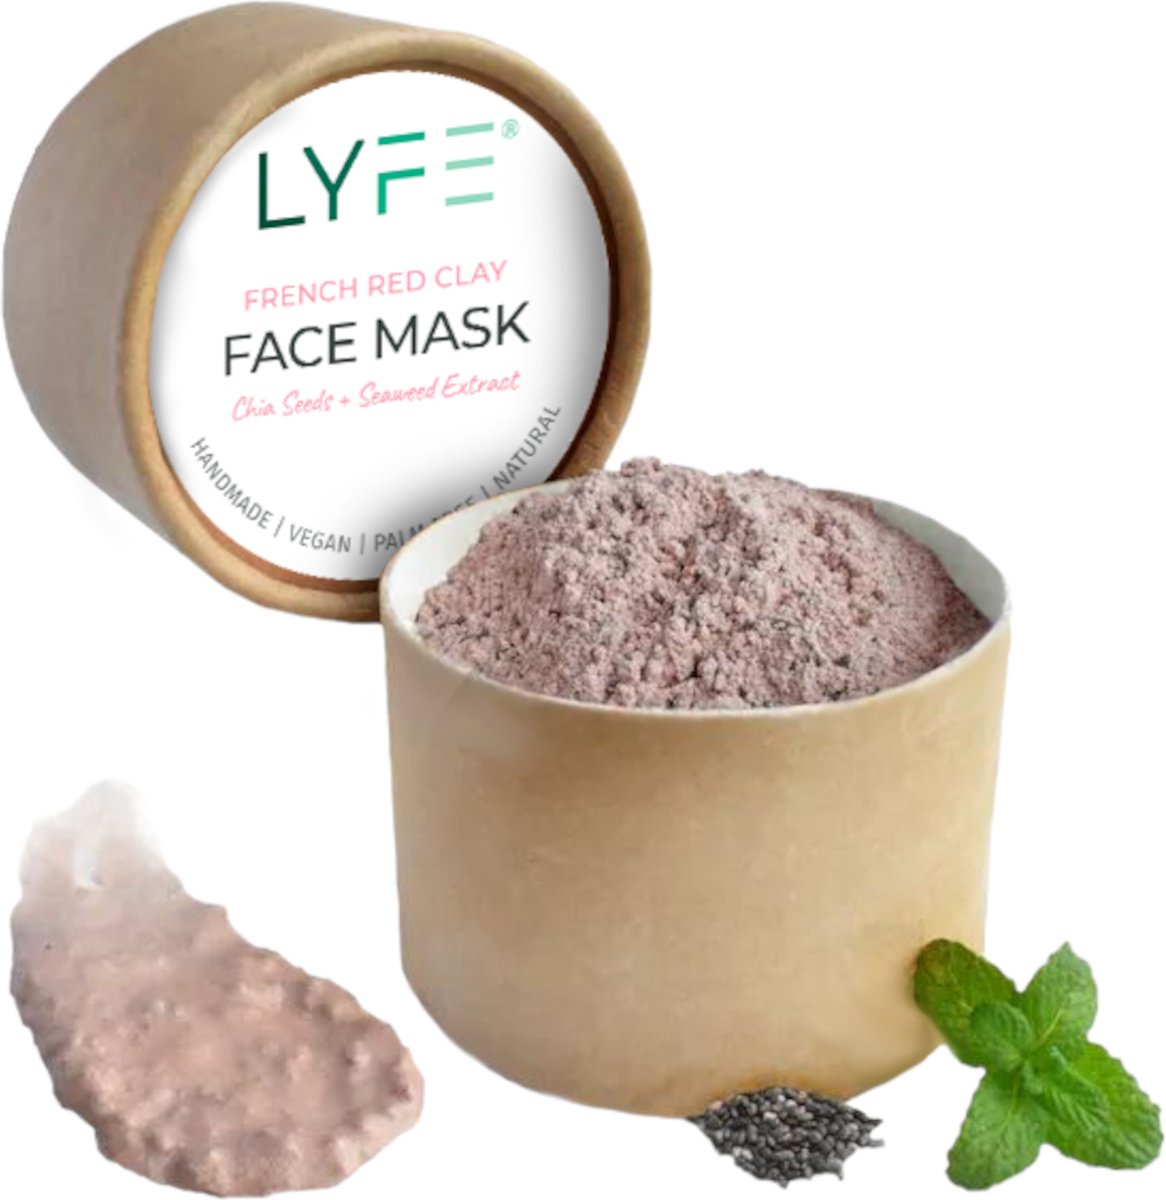 LYFE French Red Clay Face Mask for Sensitive skin Soothing and Detox. Vegan, 45 gr Powder